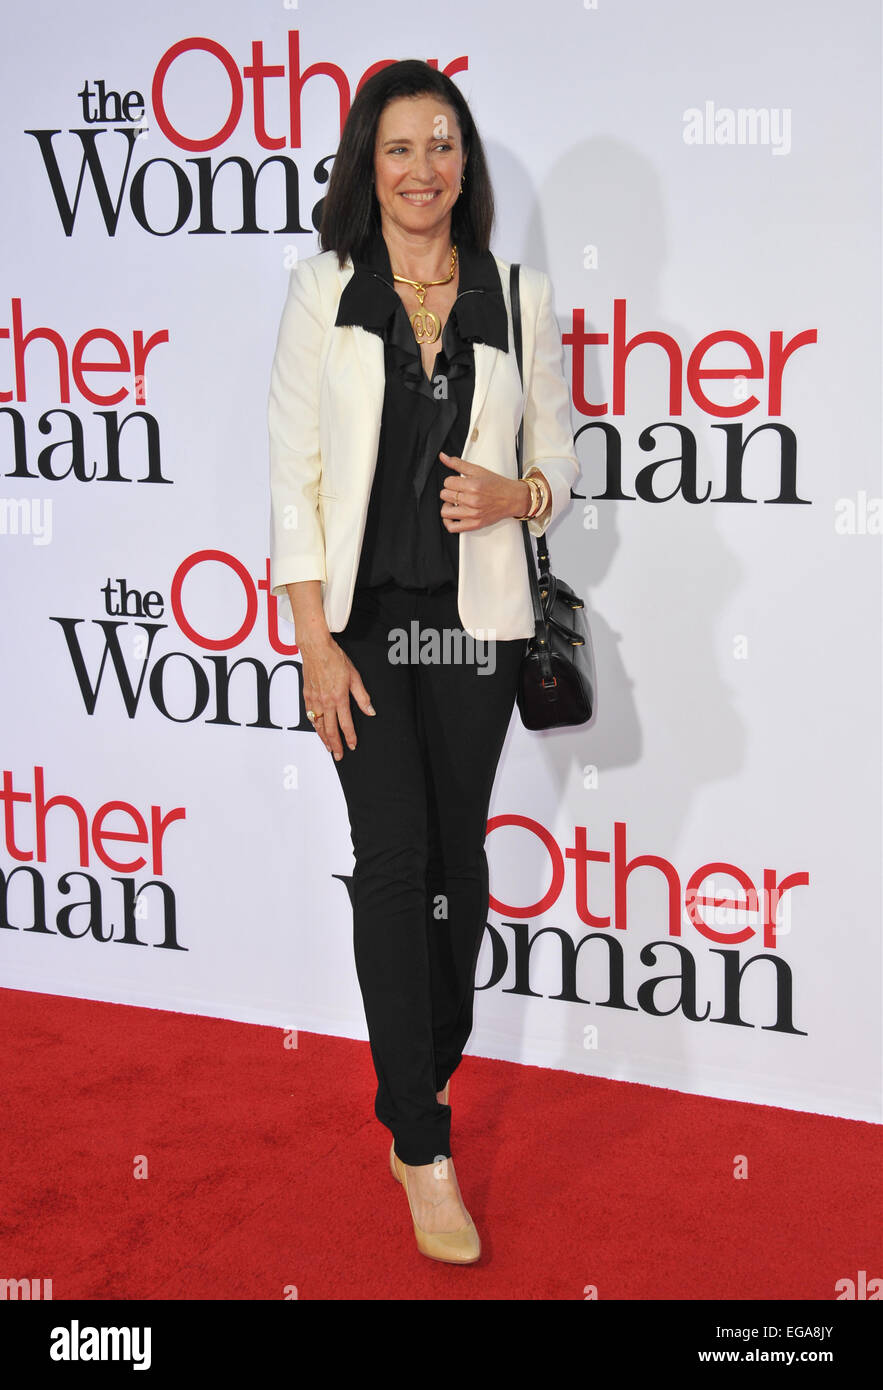 LOS ANGELES, CA - APRIL 21, 2014: Mimi Rogers at the Los Angeles premiere of 'The Other Woman' at the Regency Village Theatre, Westwood. Stock Photo